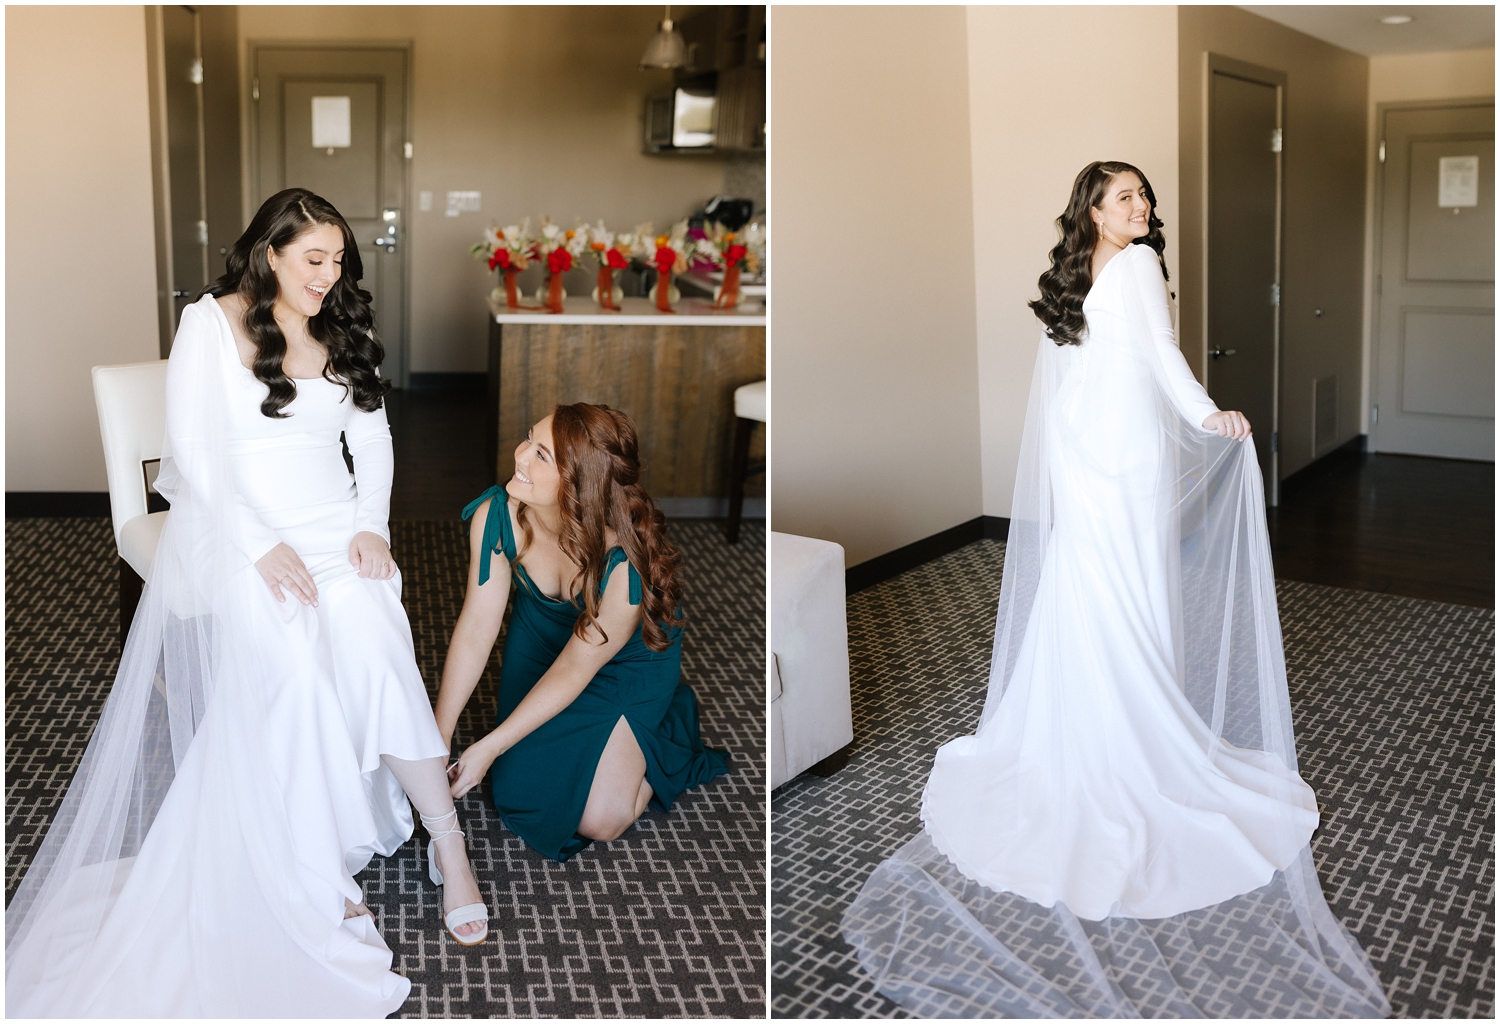 Sister helps bride put on her wedding shoes on her Wedding day in Tampa, FL